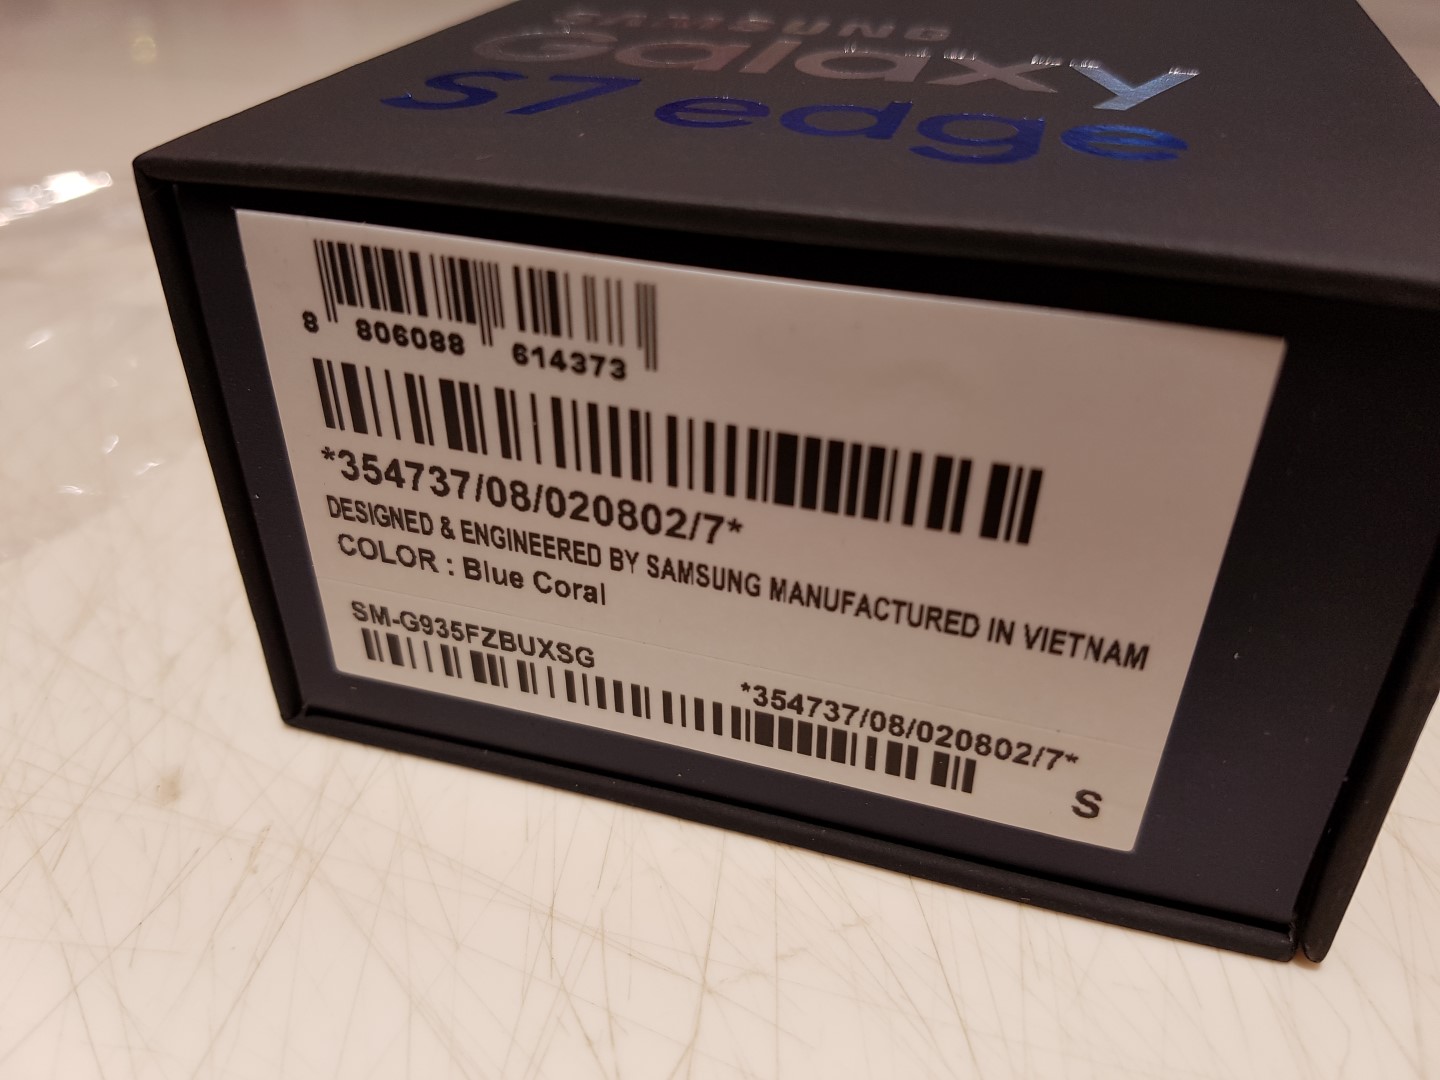 Check out these pictures of the Blue Coral Galaxy S7 edge unboxing ...